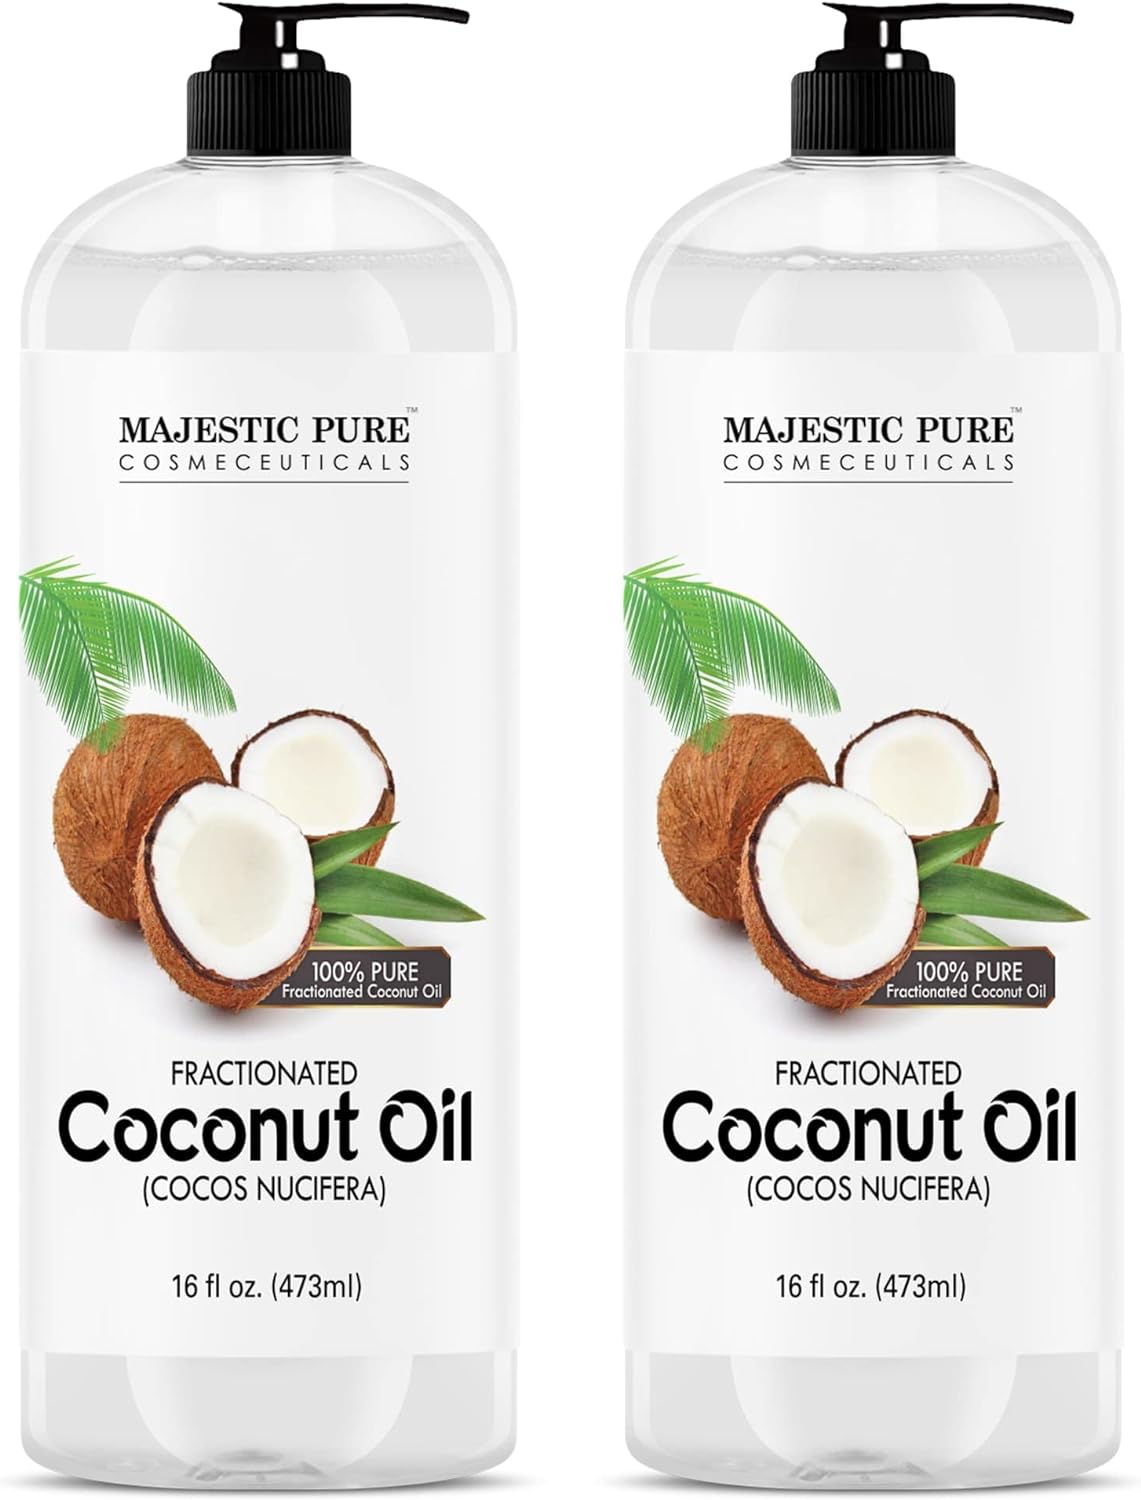 Majestic Pure Fractionated Coconut Oil - Relaxing Massage Oil, Liquid